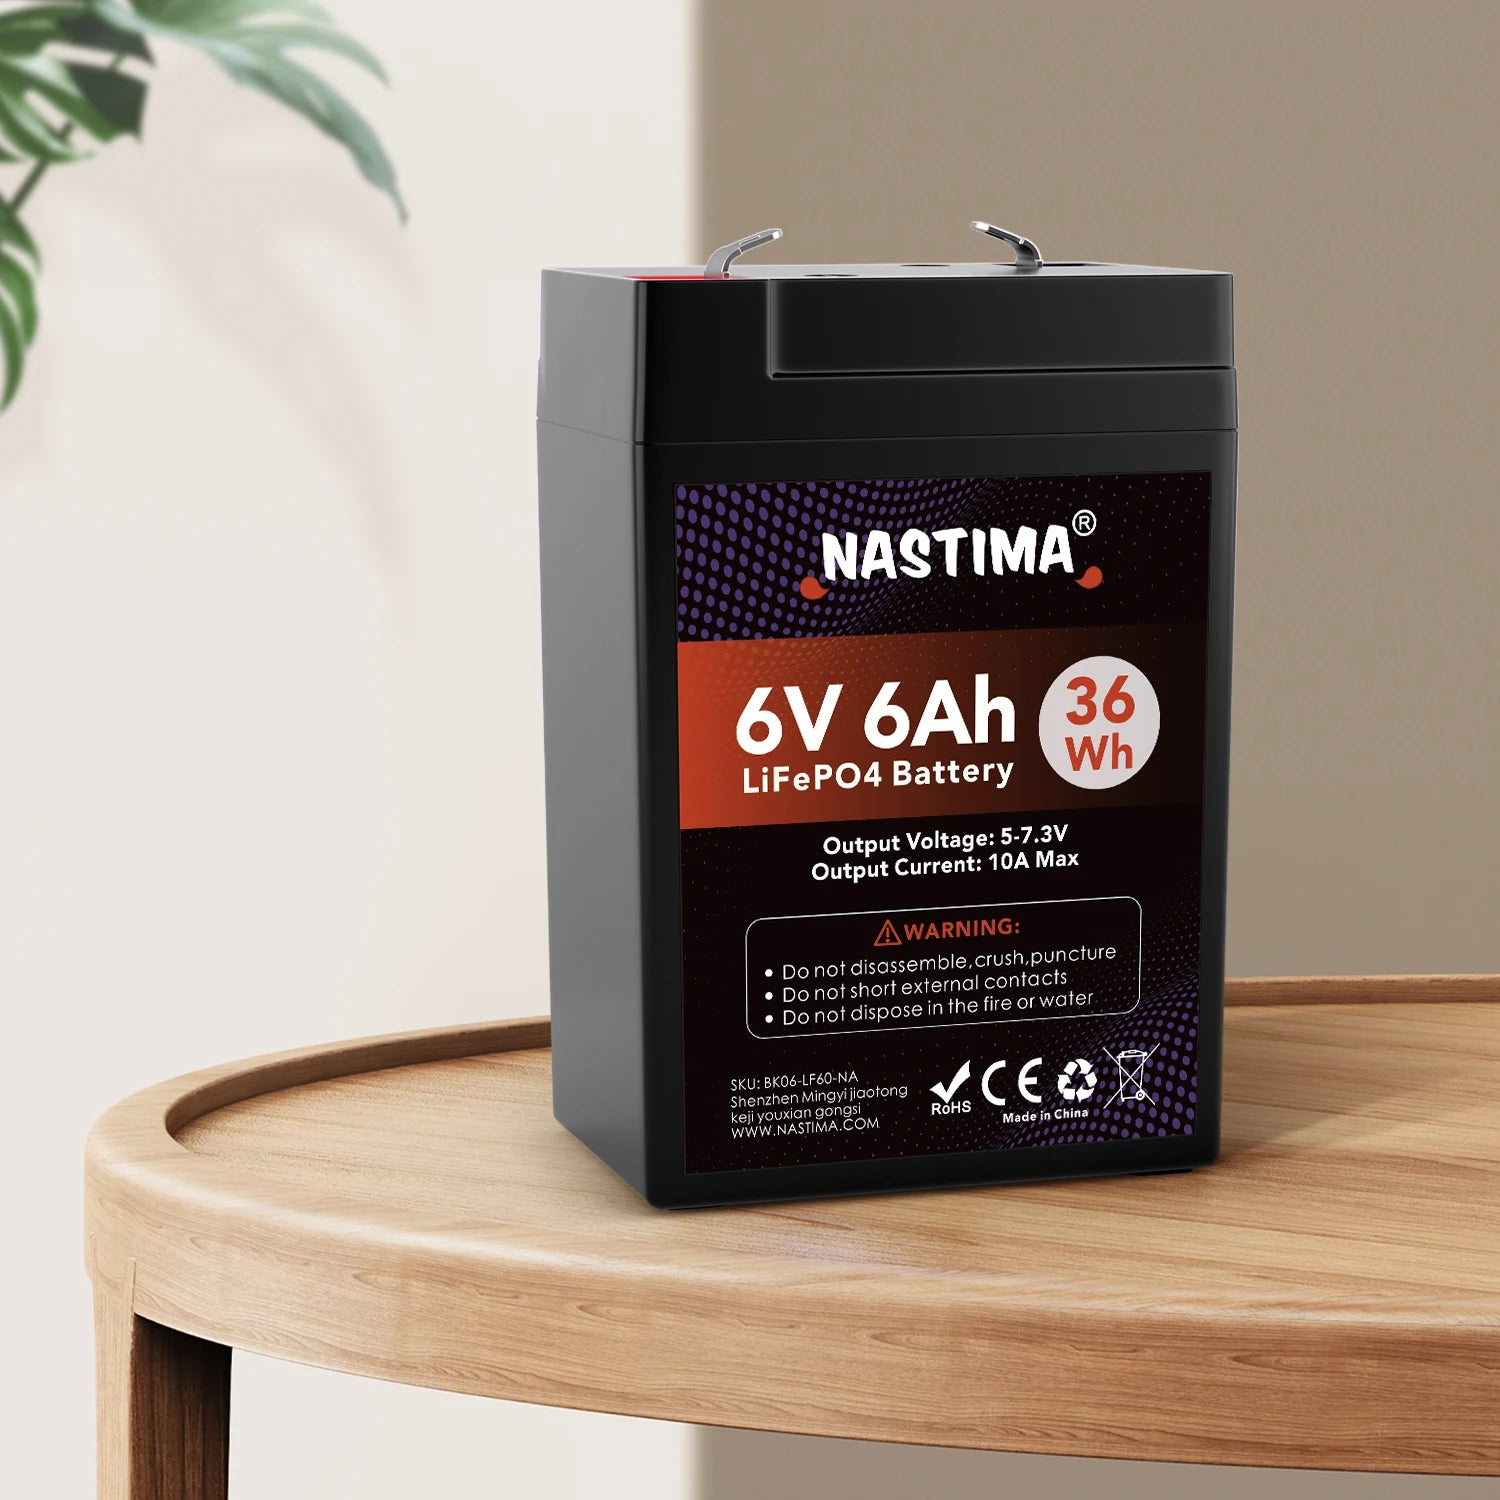 NASTIMA 6V 6Ah LiFePO4 Battery With BMS Rechargeable Lithium Iron Phosphate Battery for Emergency Light Lantern Kids Ride On Car - Inverted Powers